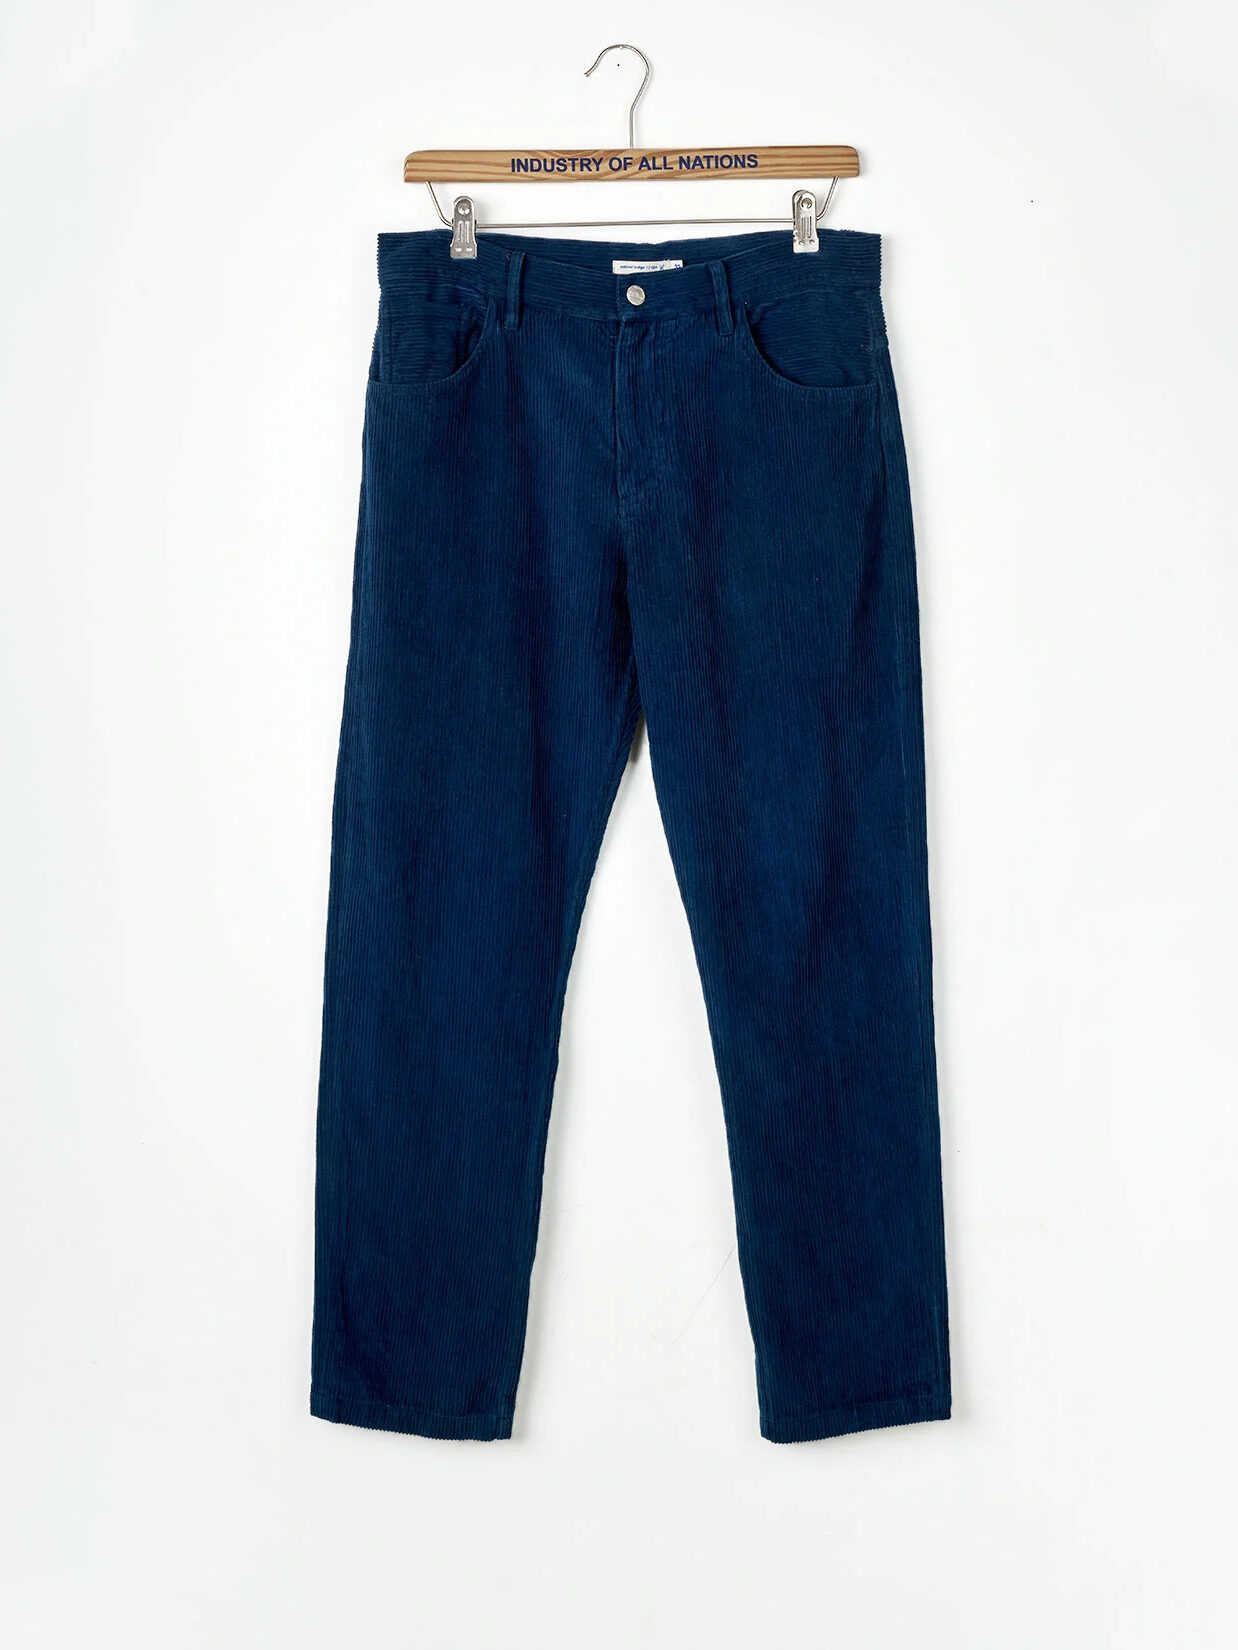 Industry Of All Nations Corduroy Pants